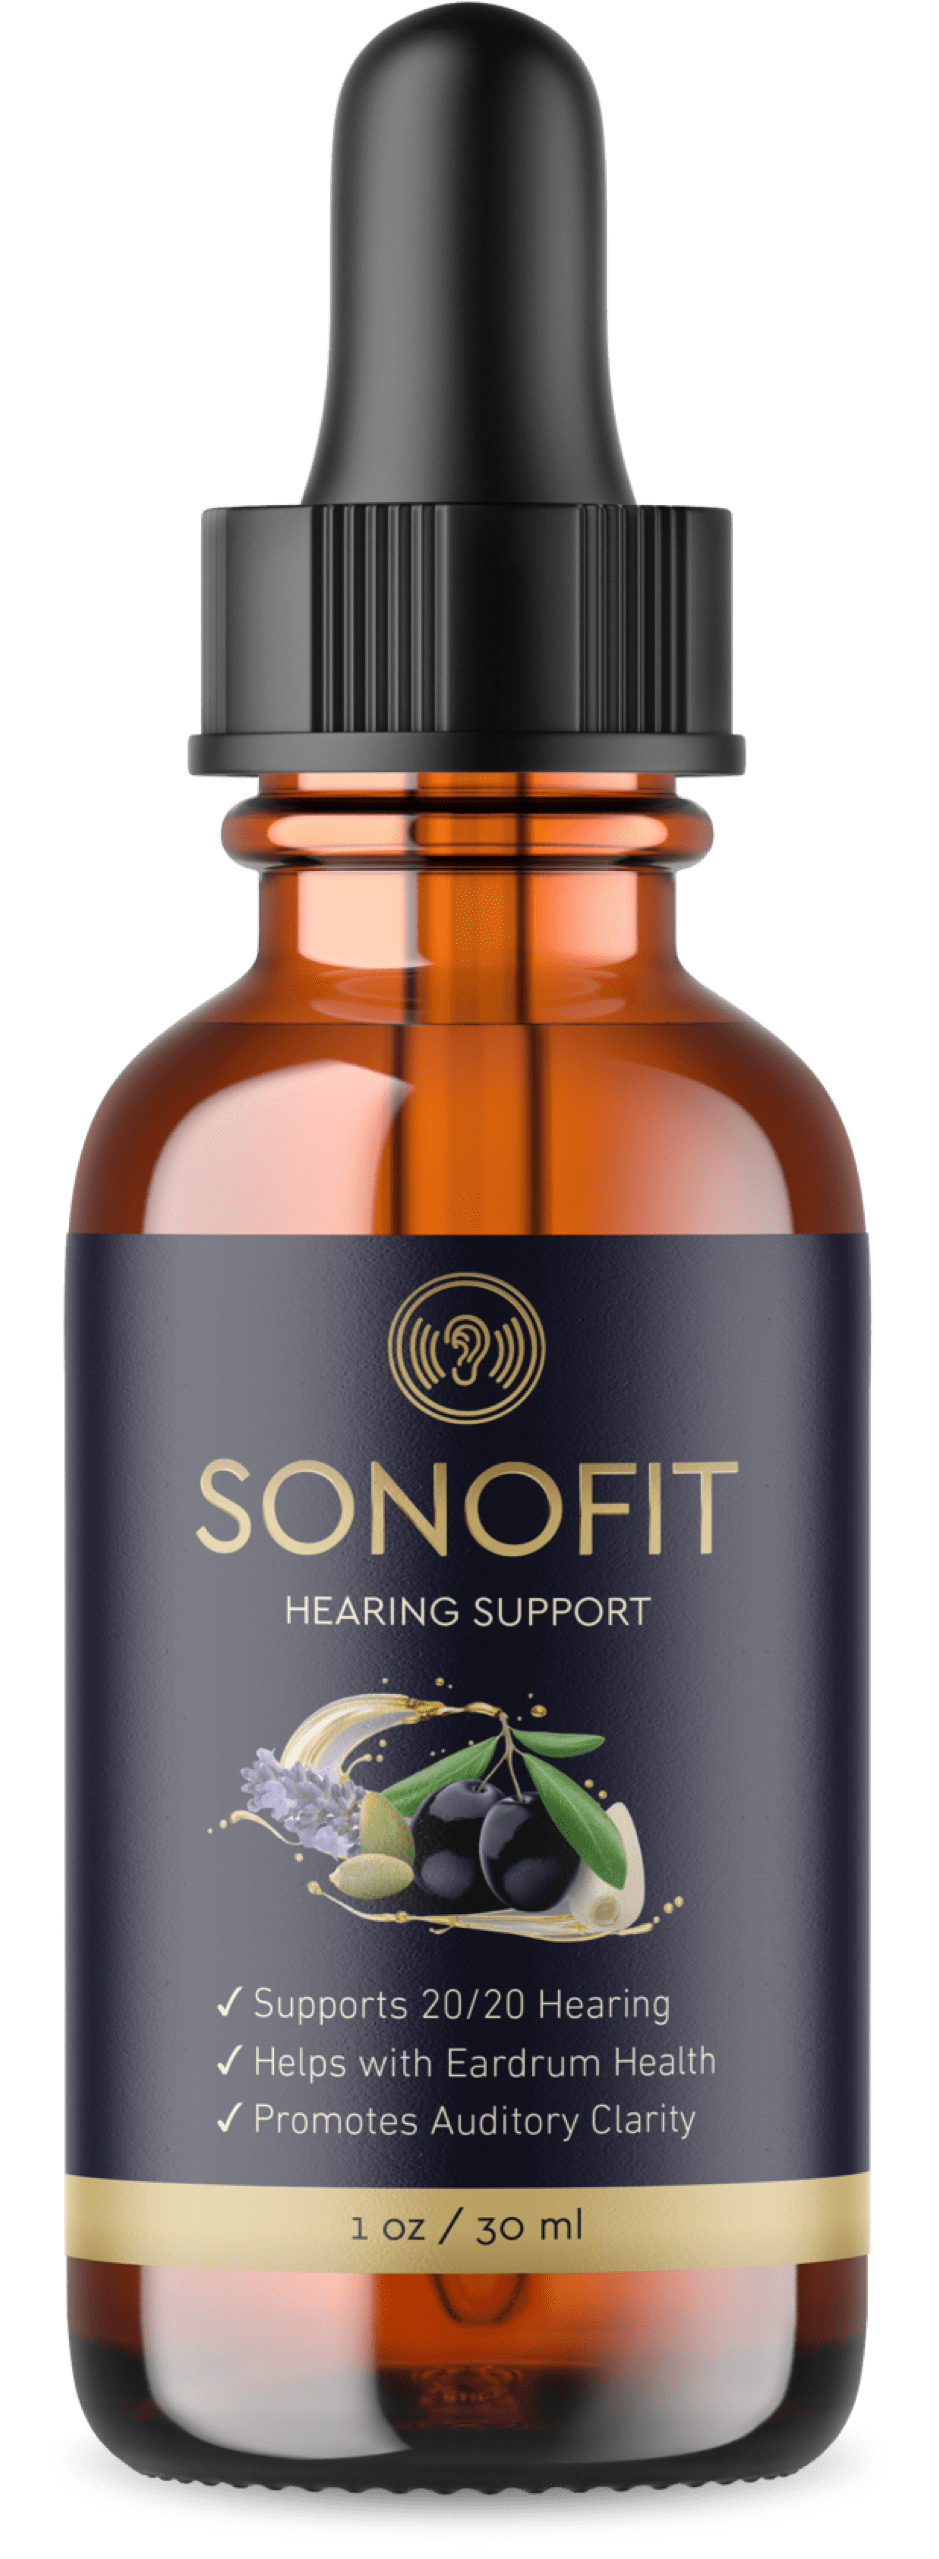 How To Improve Hearing - SonoFit